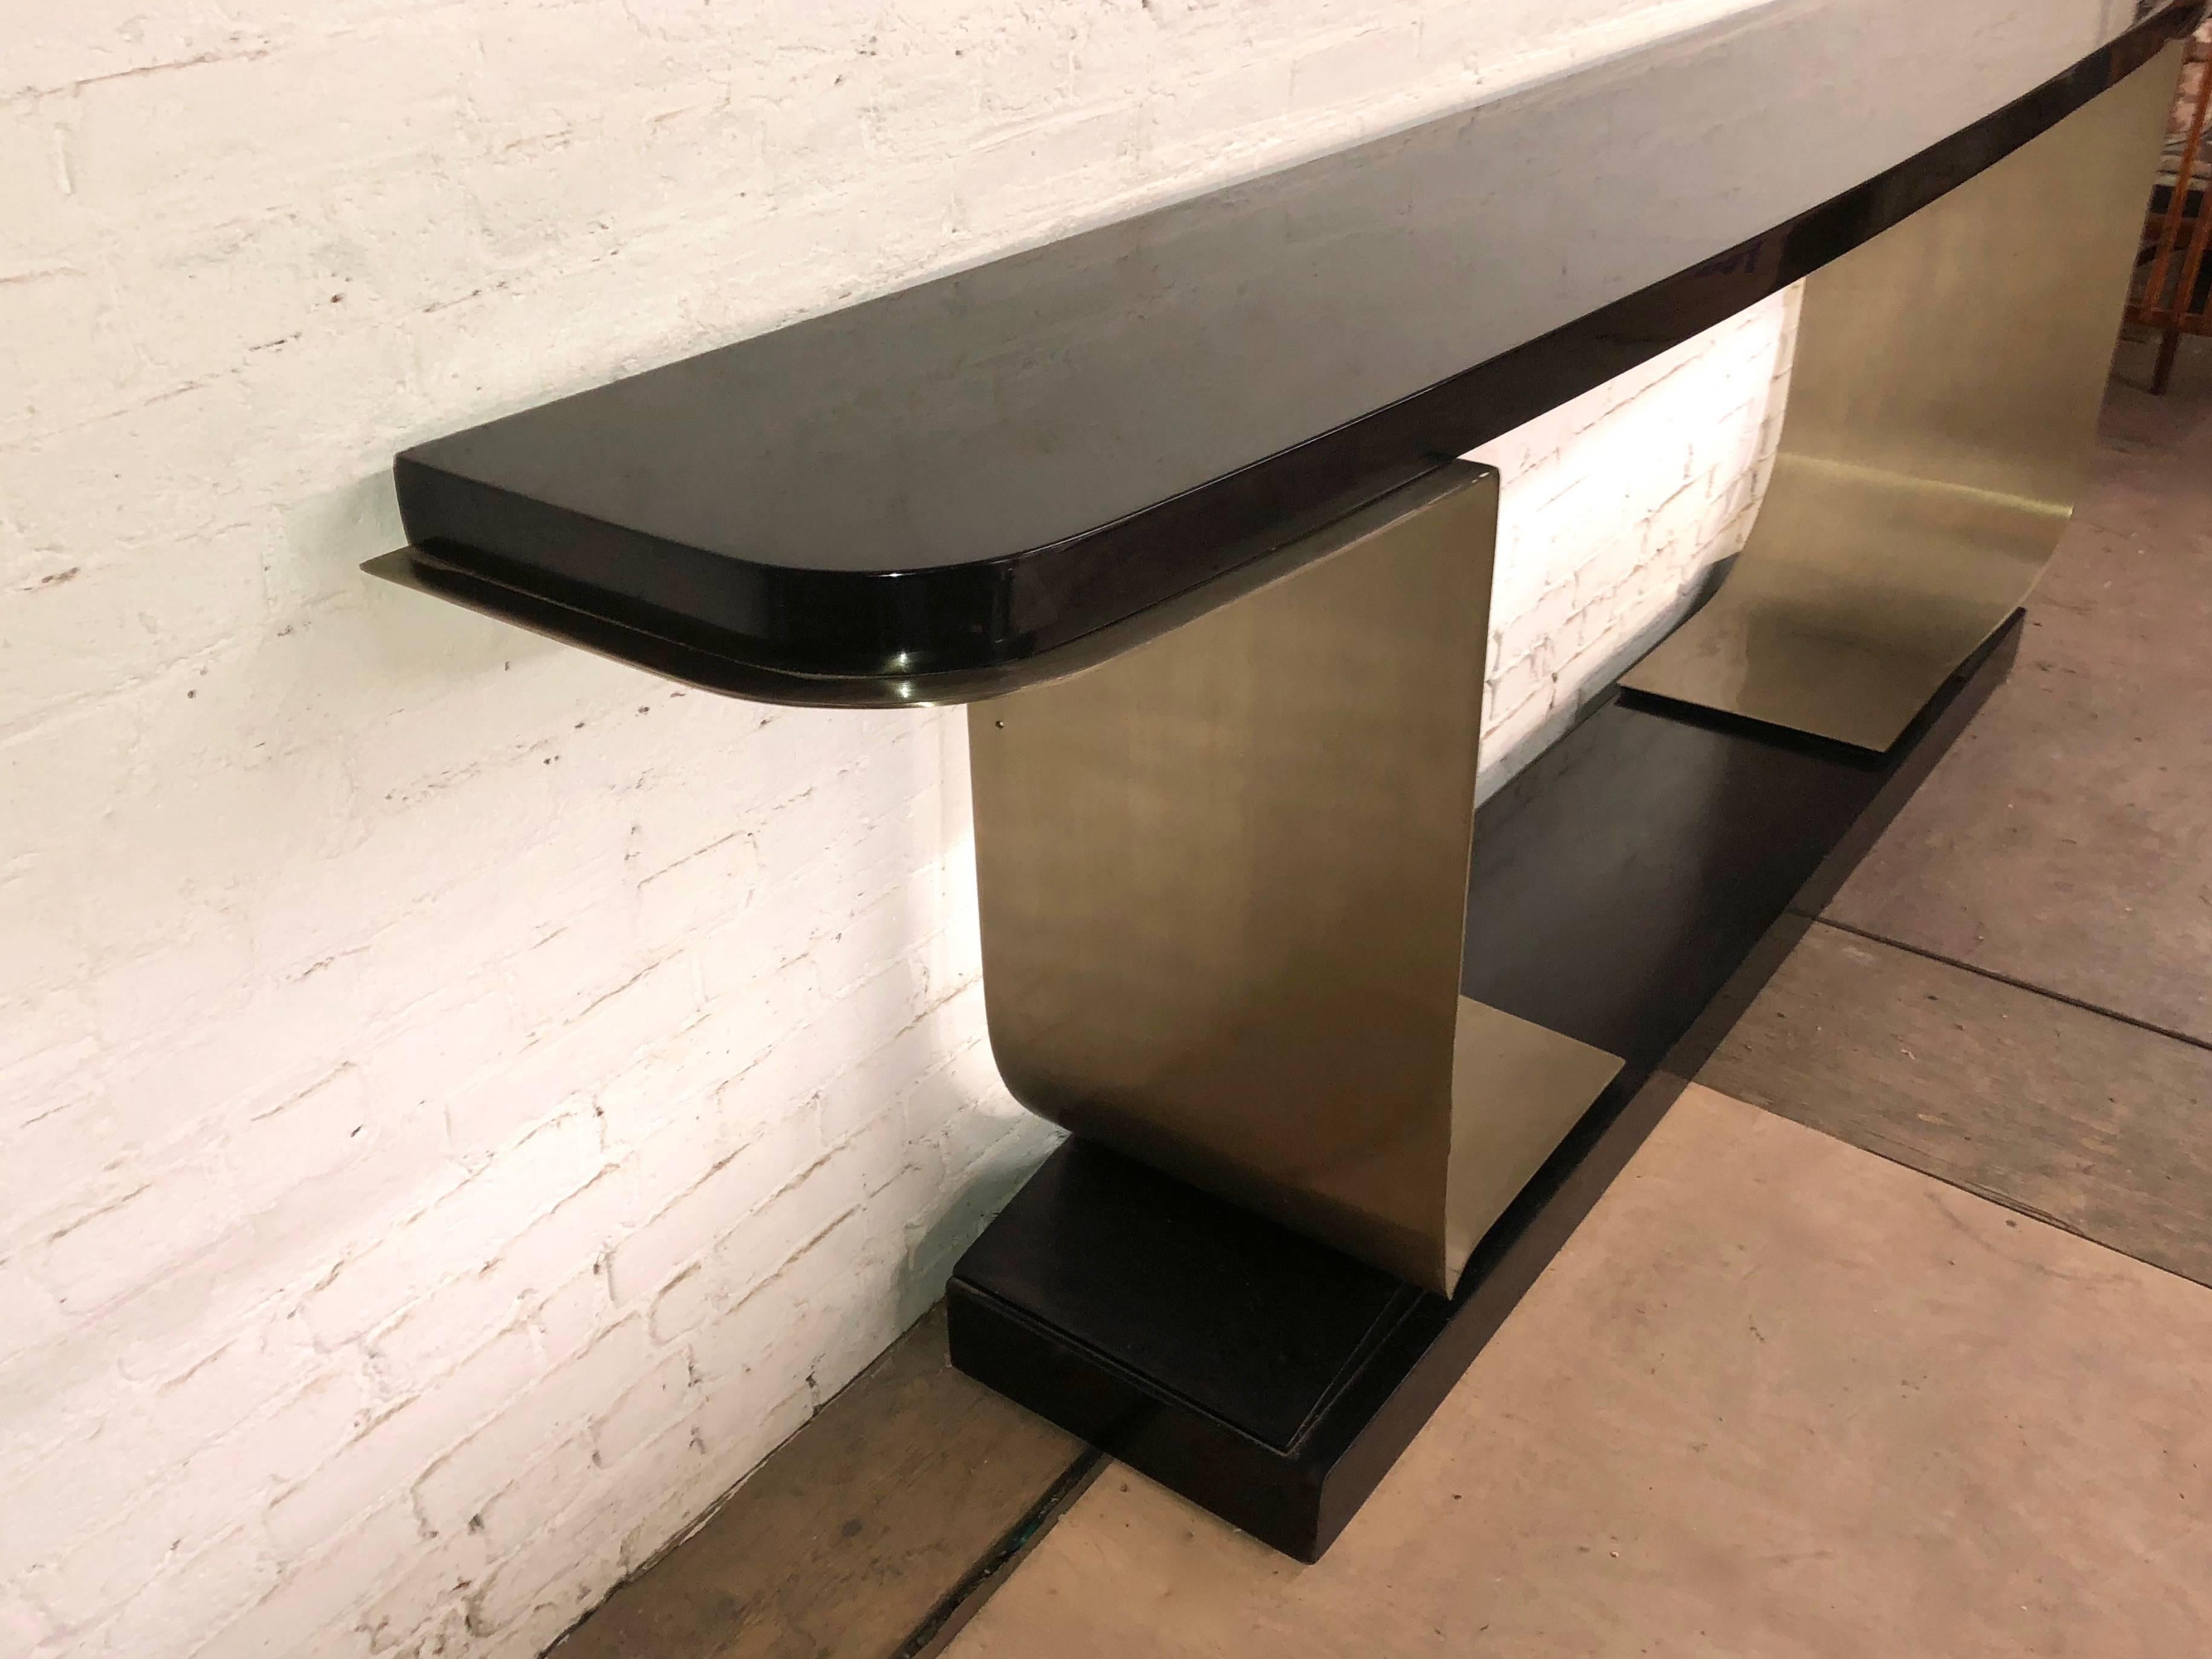 Deco inspired console table with a gloss black lacquered wooden top and base connected by two curved, L-shaped, inward facing brushed steel supports.
The top measures 104.25 inches L x 16 inches D.